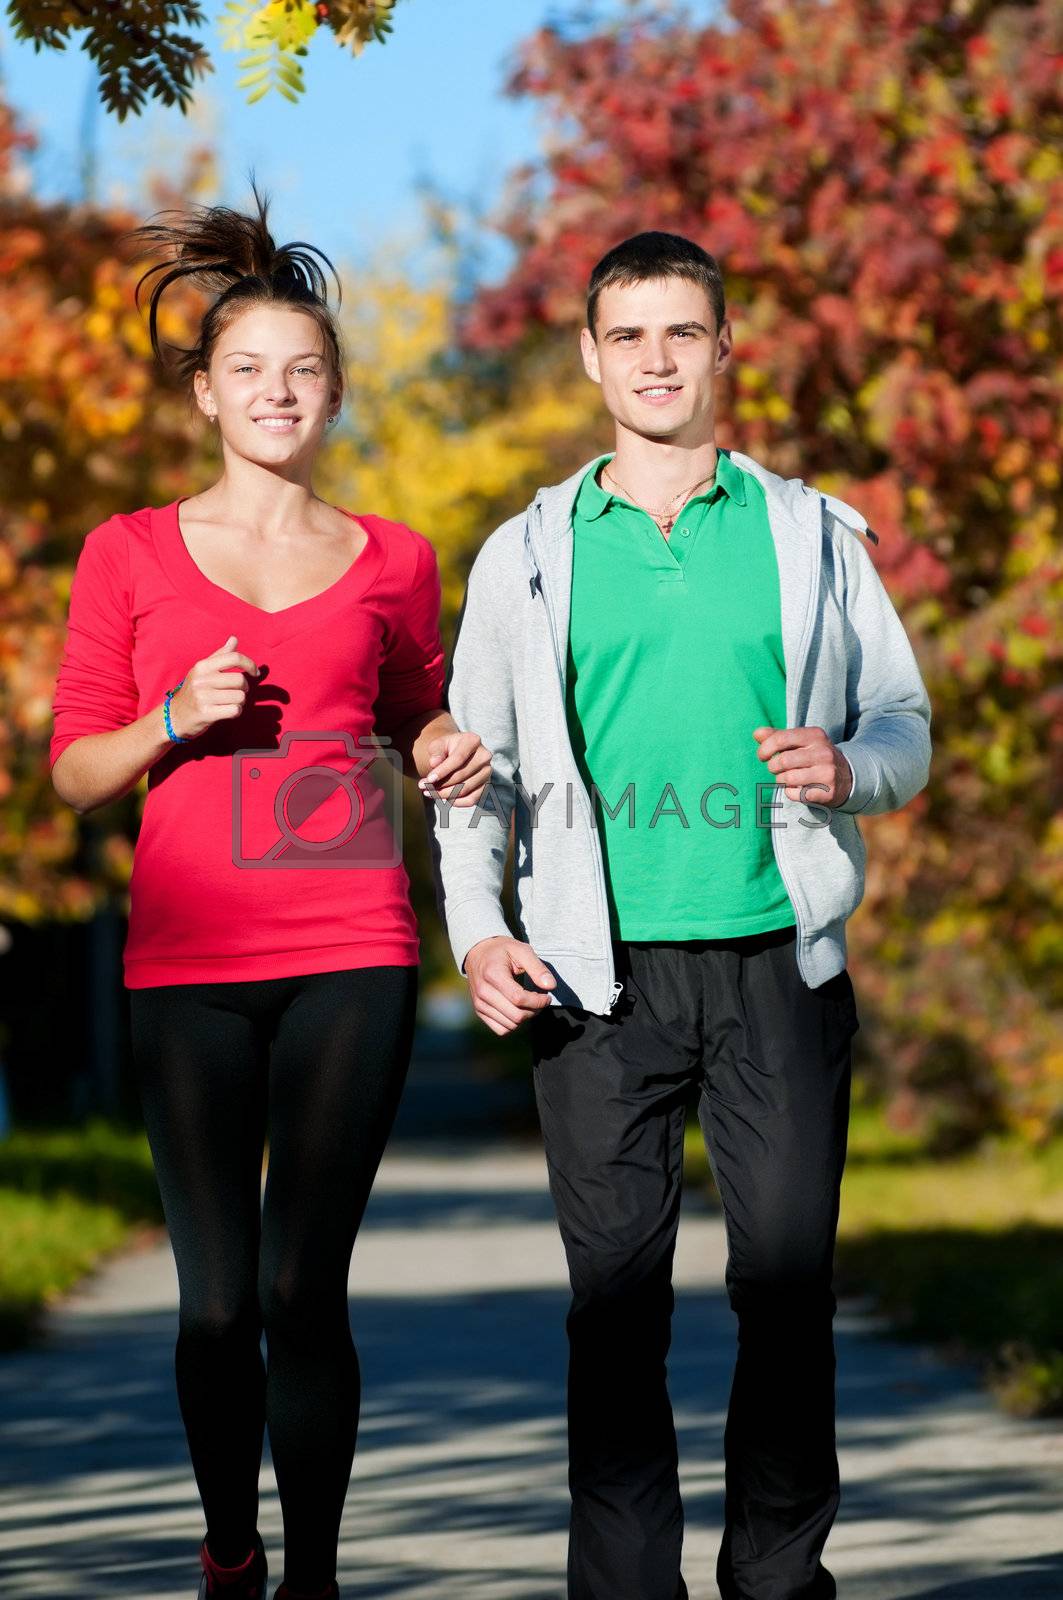 Royalty free image of Young man and woman jogiing by markin